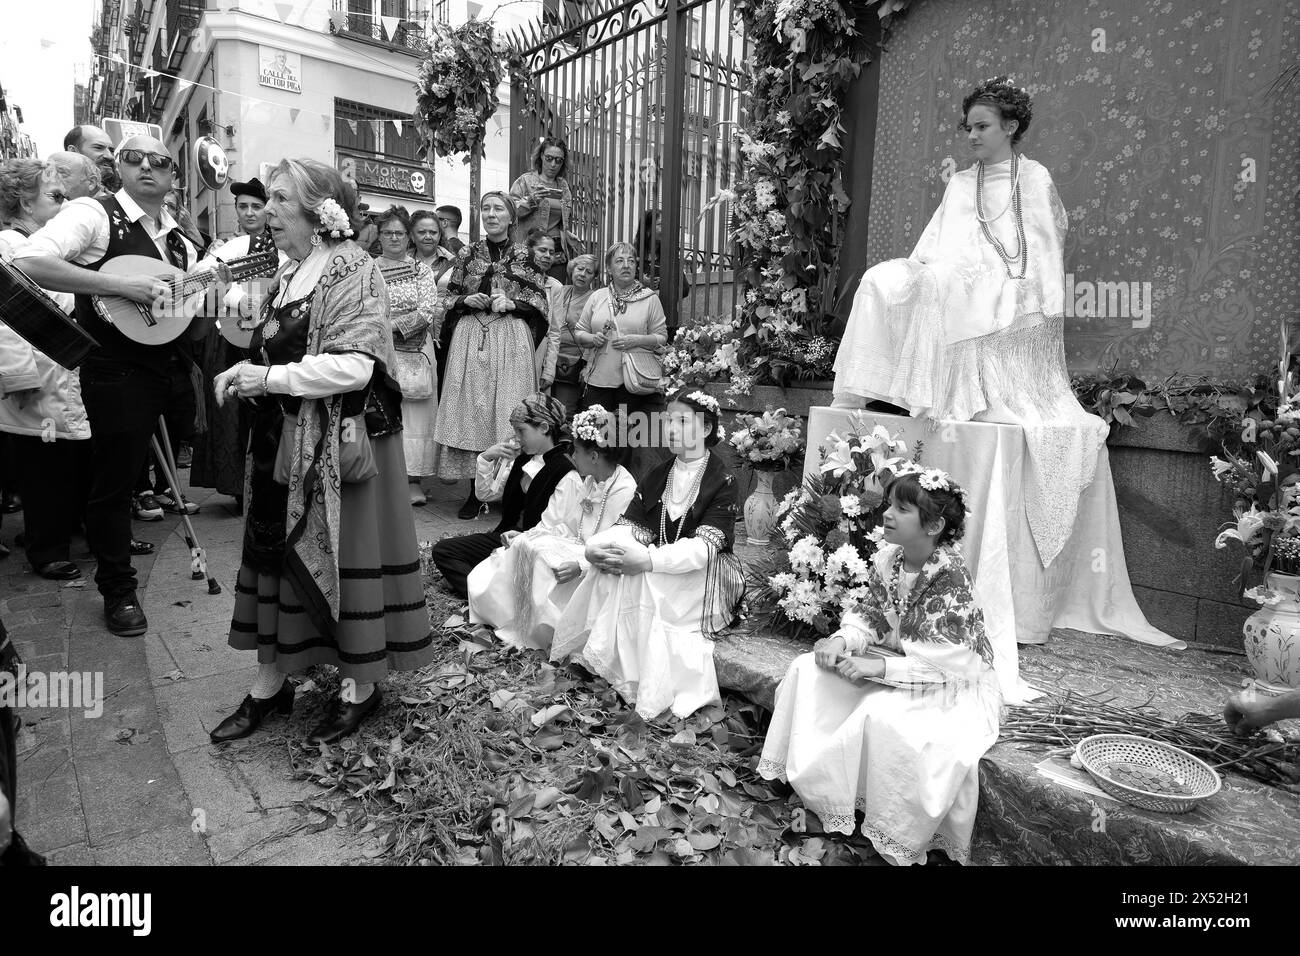 Celebration of 'La Maya' refers to girls sitting on an altar adorned with flowers to mark the arrival of spring, this tradition dates back to medieval Stock Photo